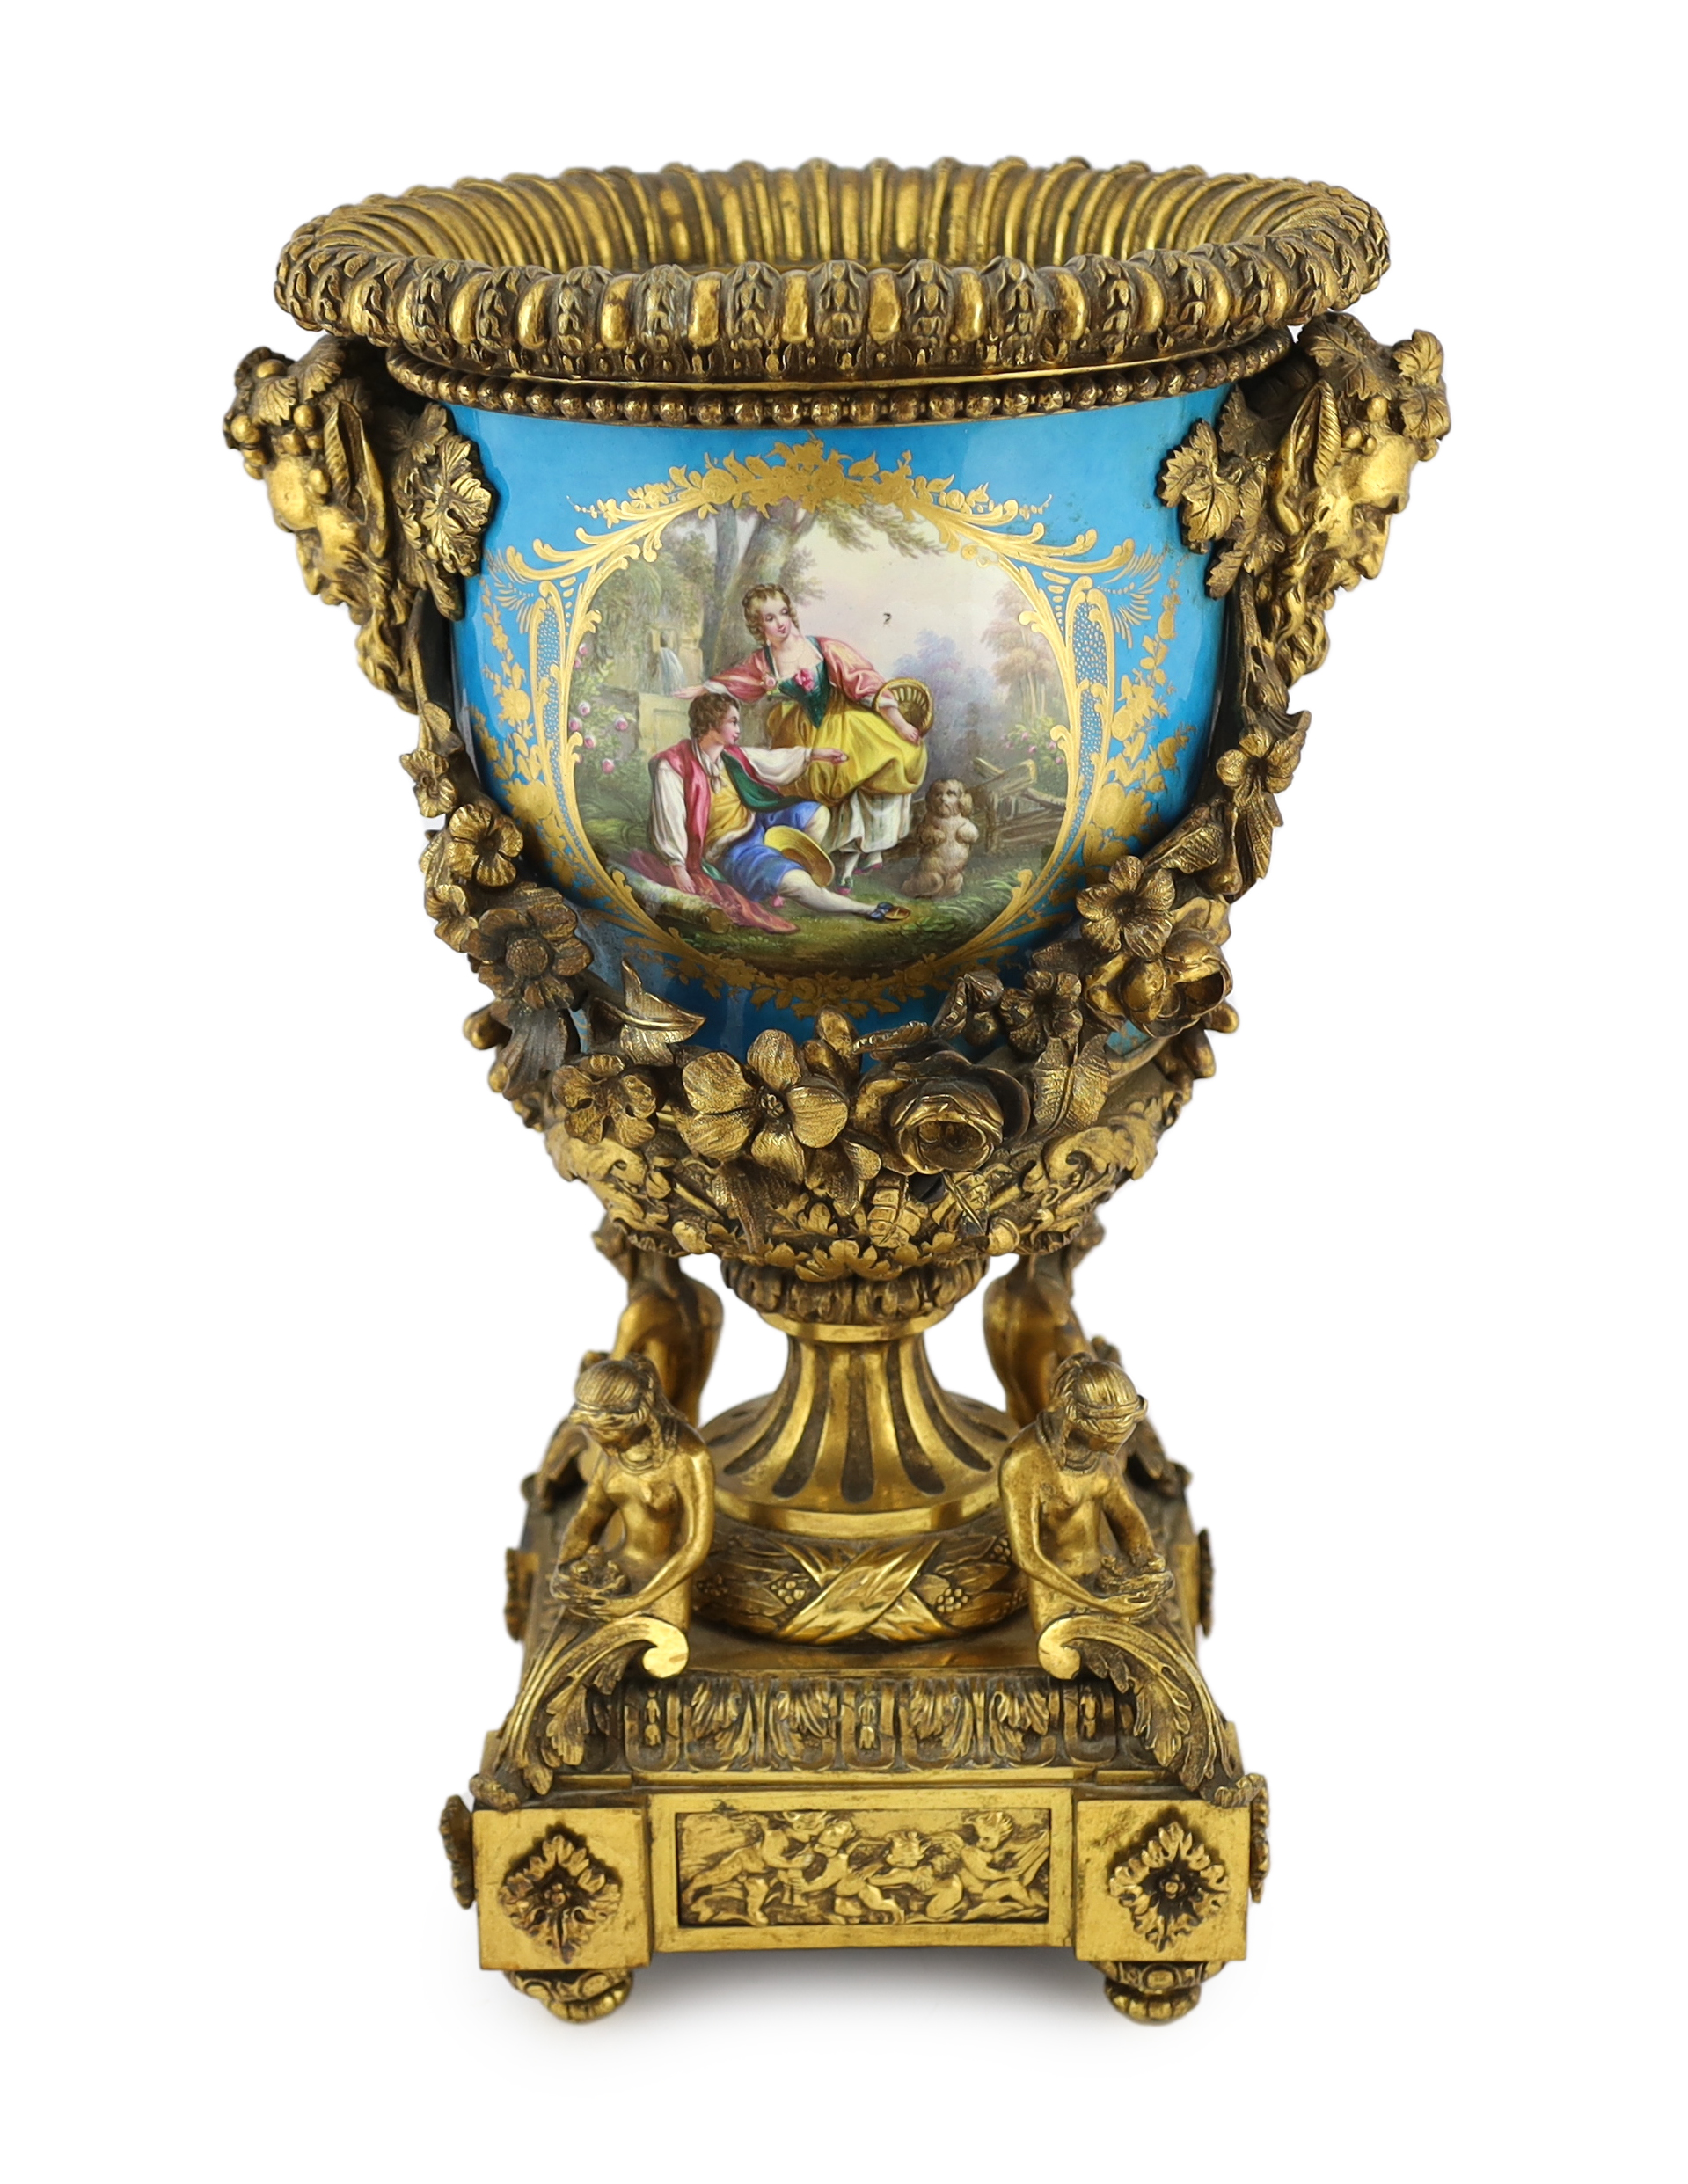 An impressive French Sevres style porcelain and ormolu mounted pedestal vase, 19th century